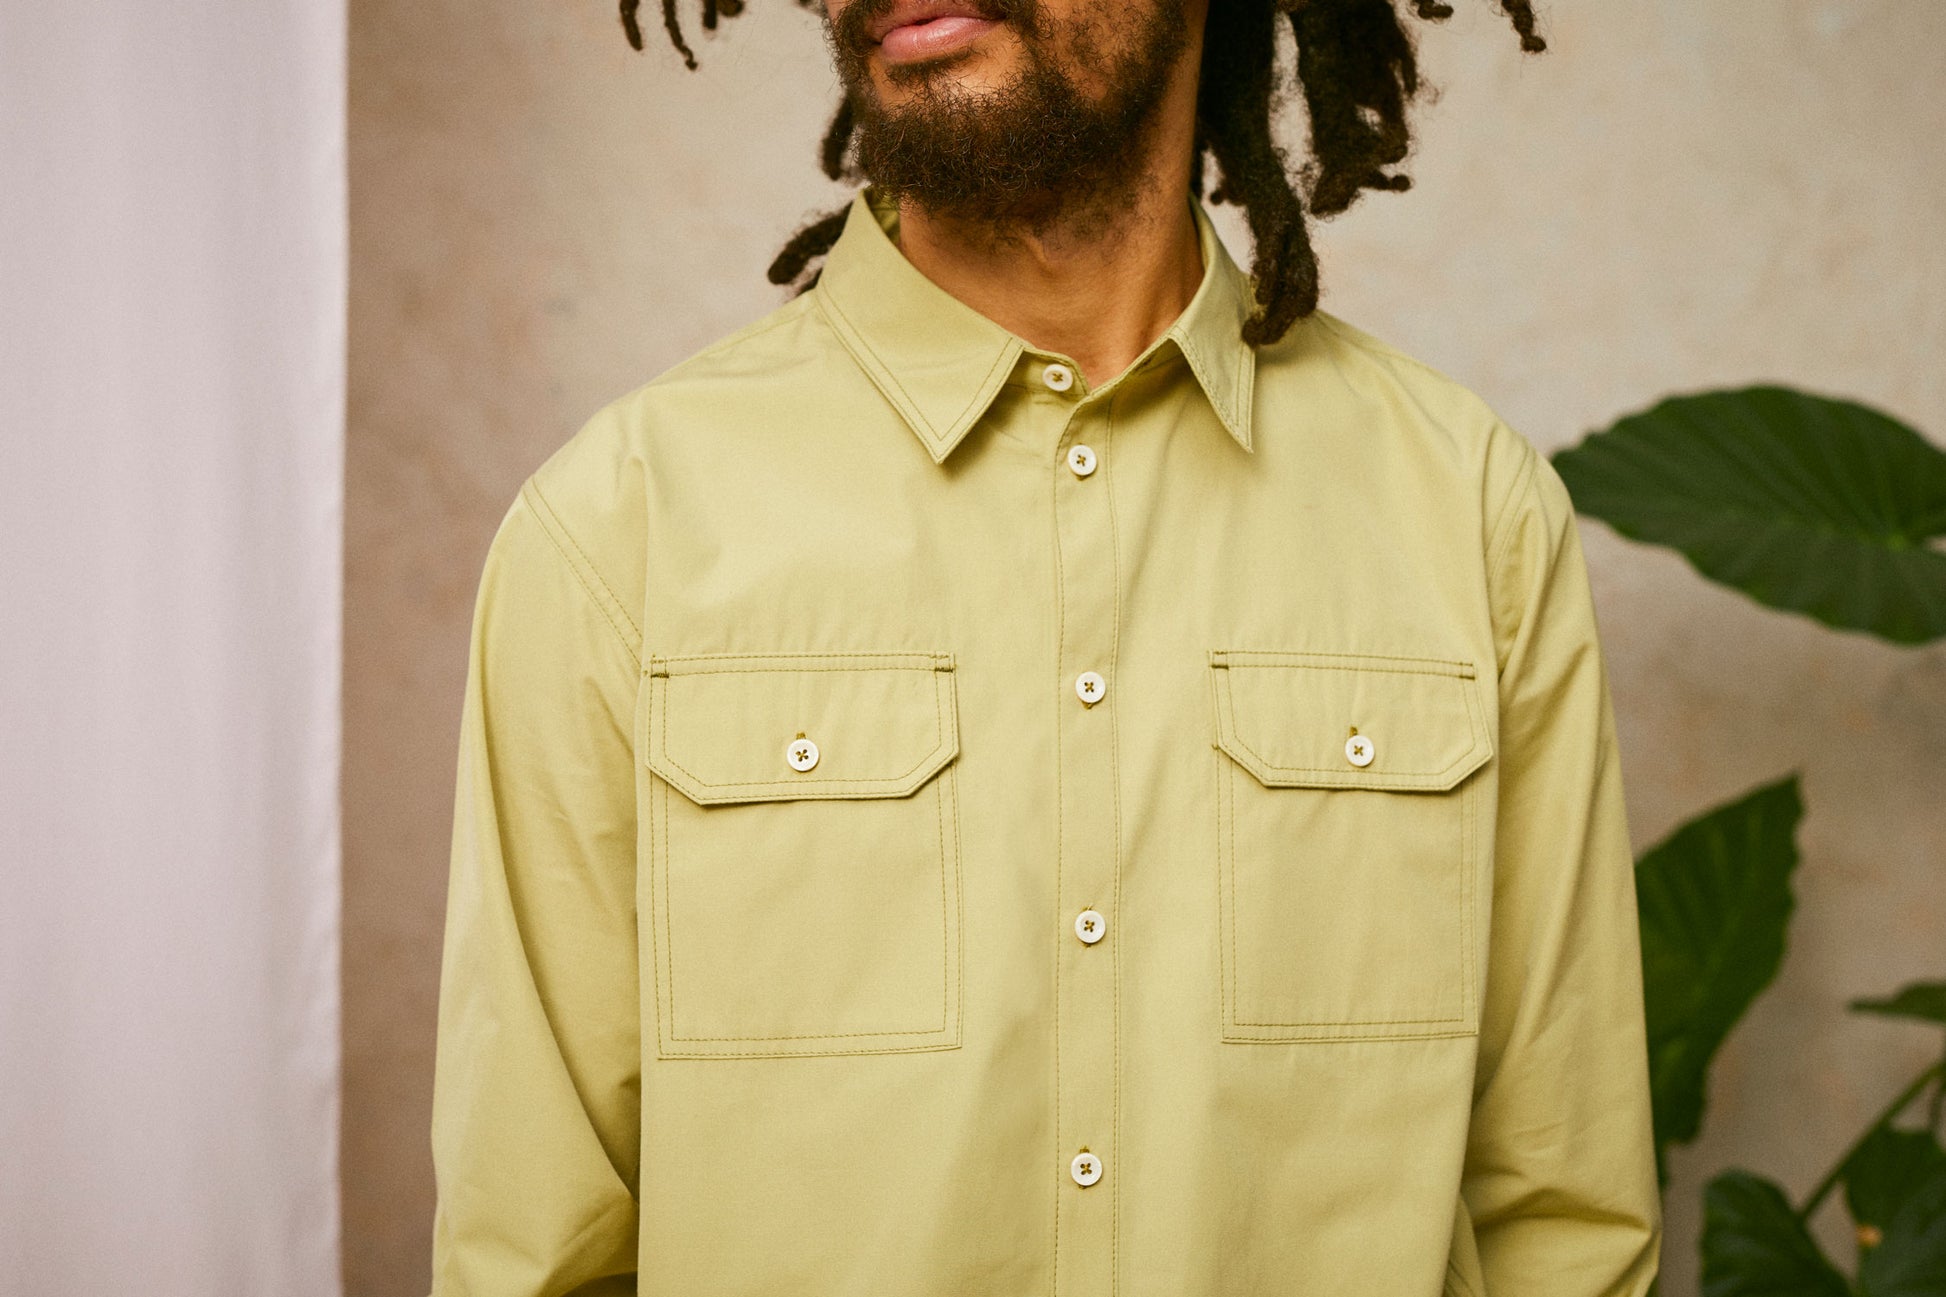 Close up of chest; model wears Saywood's Eddy Mens Khaki Shirt. The images shows the utility pockets on the chest and the top sticthing. A plant and drop of pink fabric can be seen in the background.